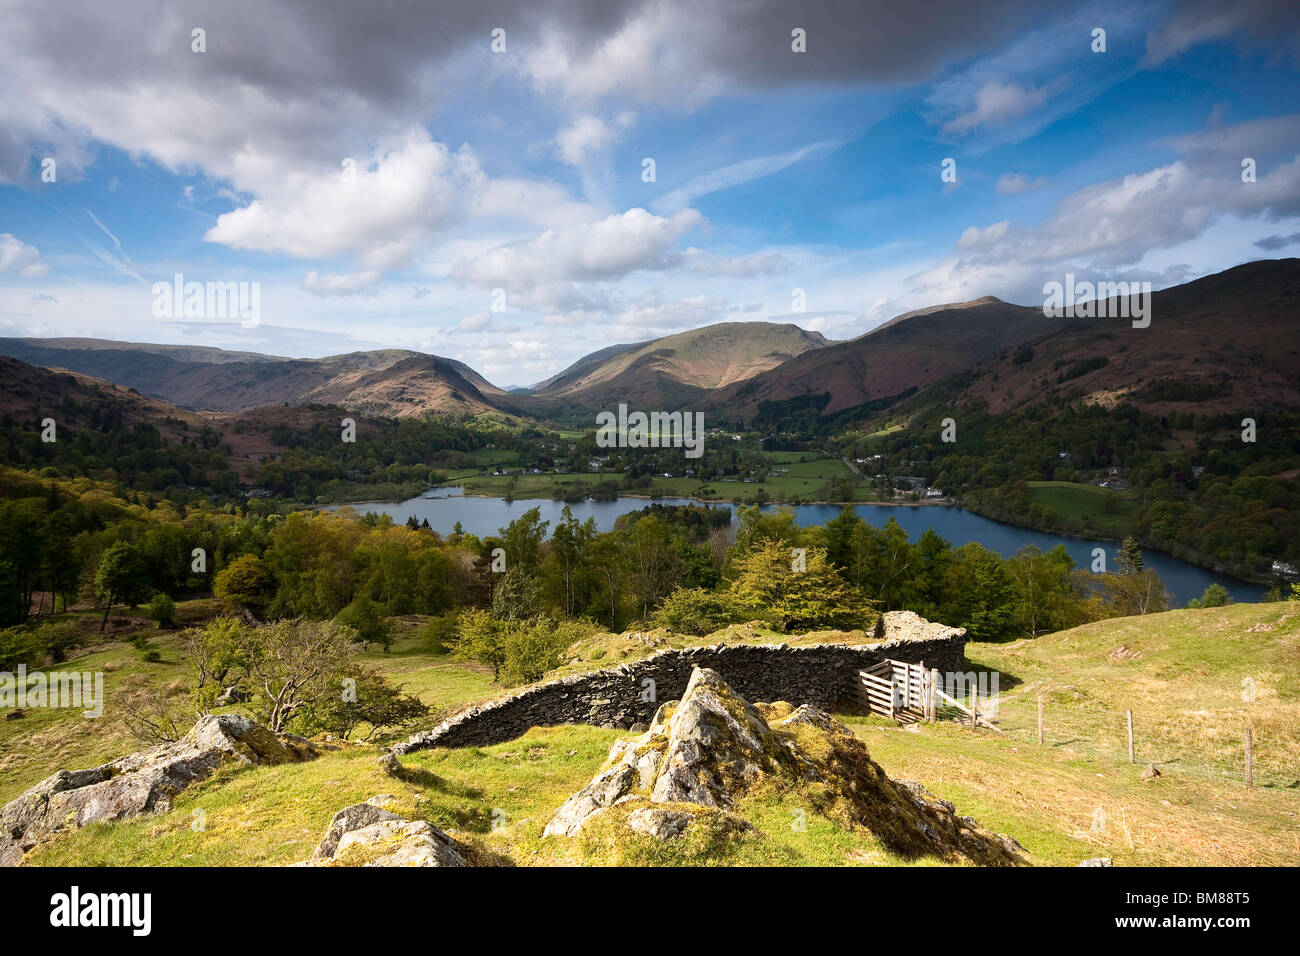 A landscape shot of the valley and lake at Grasmere, Lake District. Stock Photo